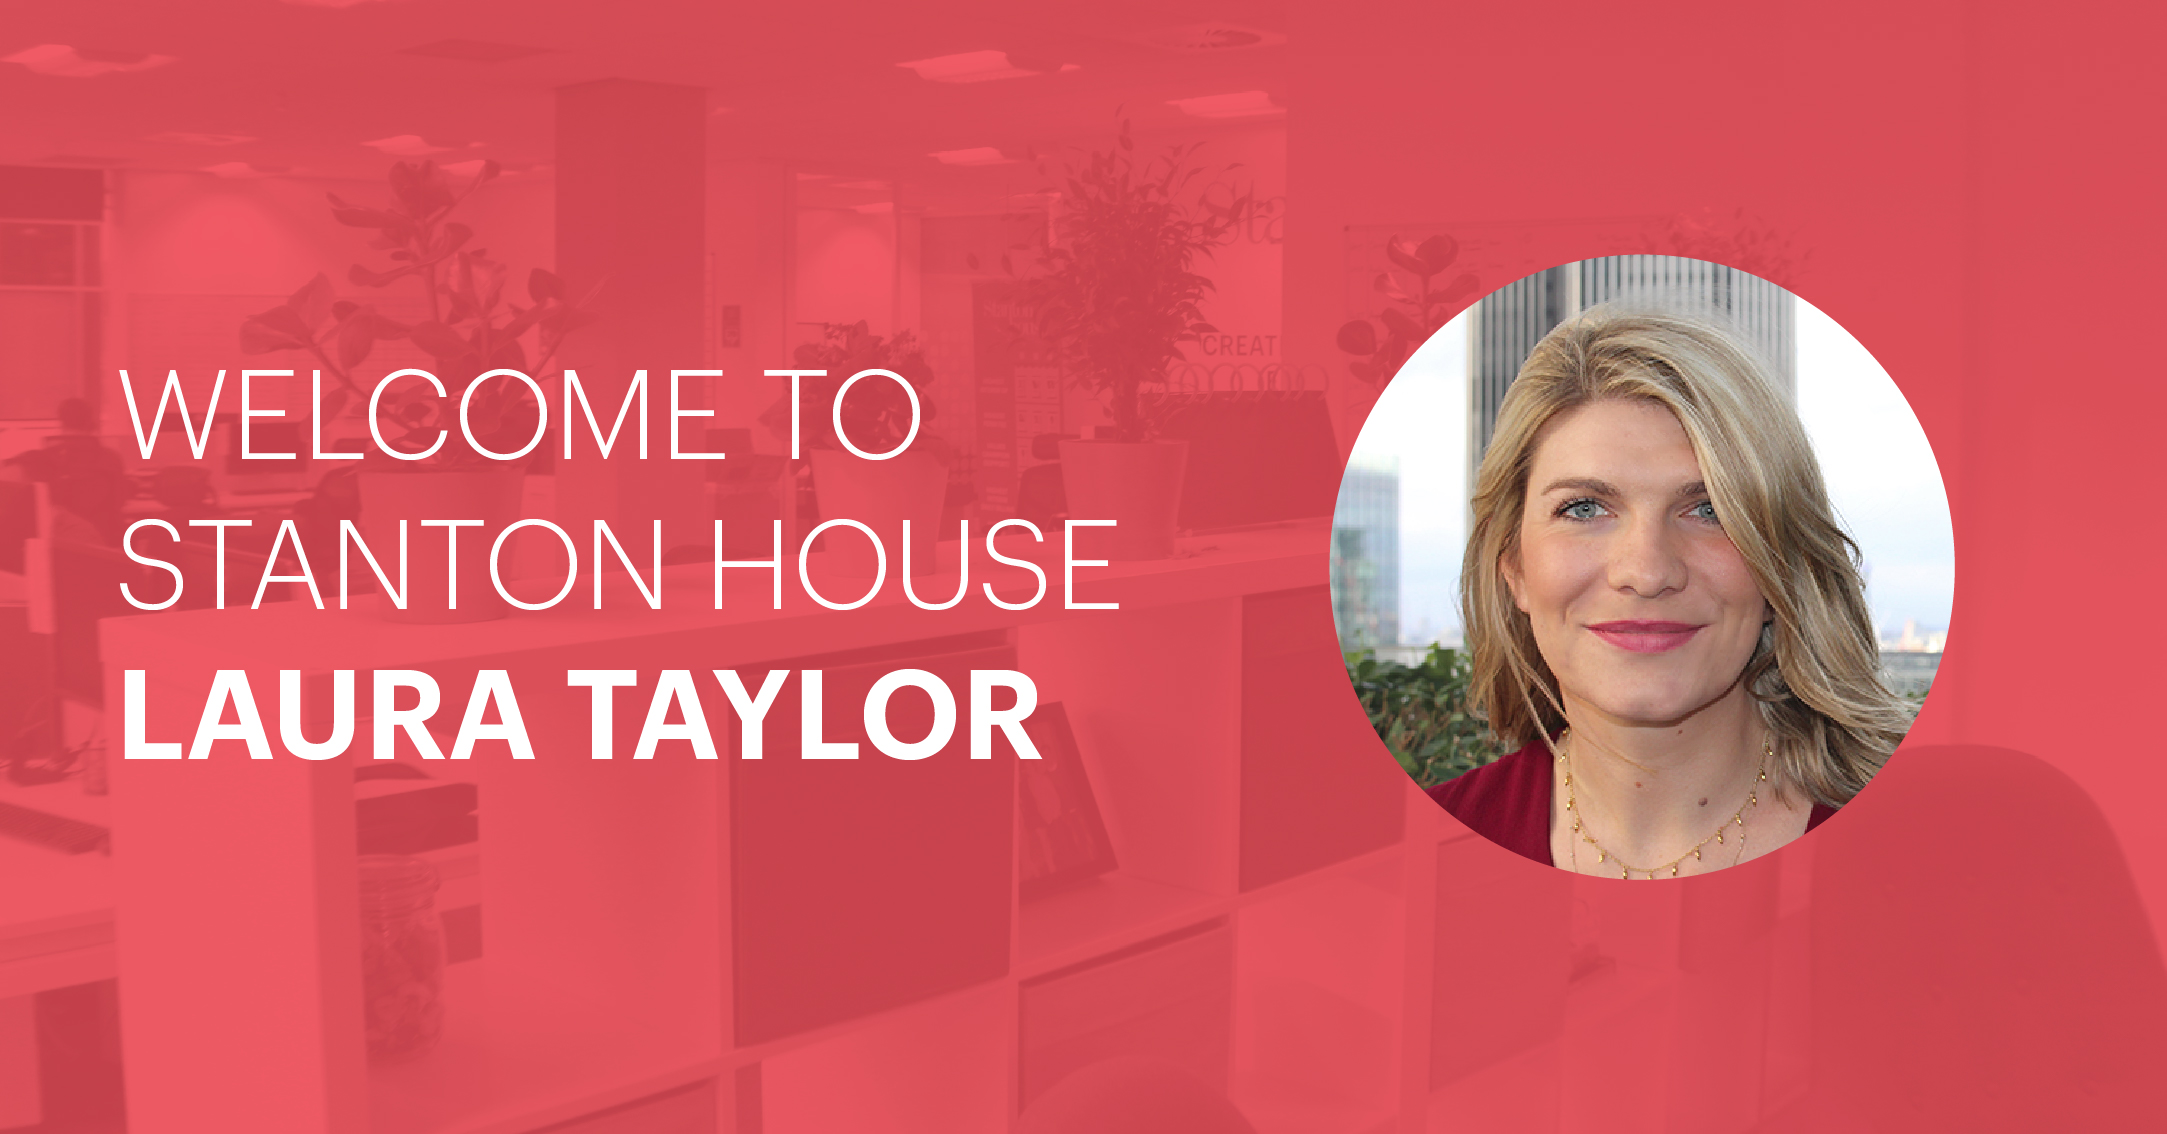 Welcome to Stanton House Laura Taylor